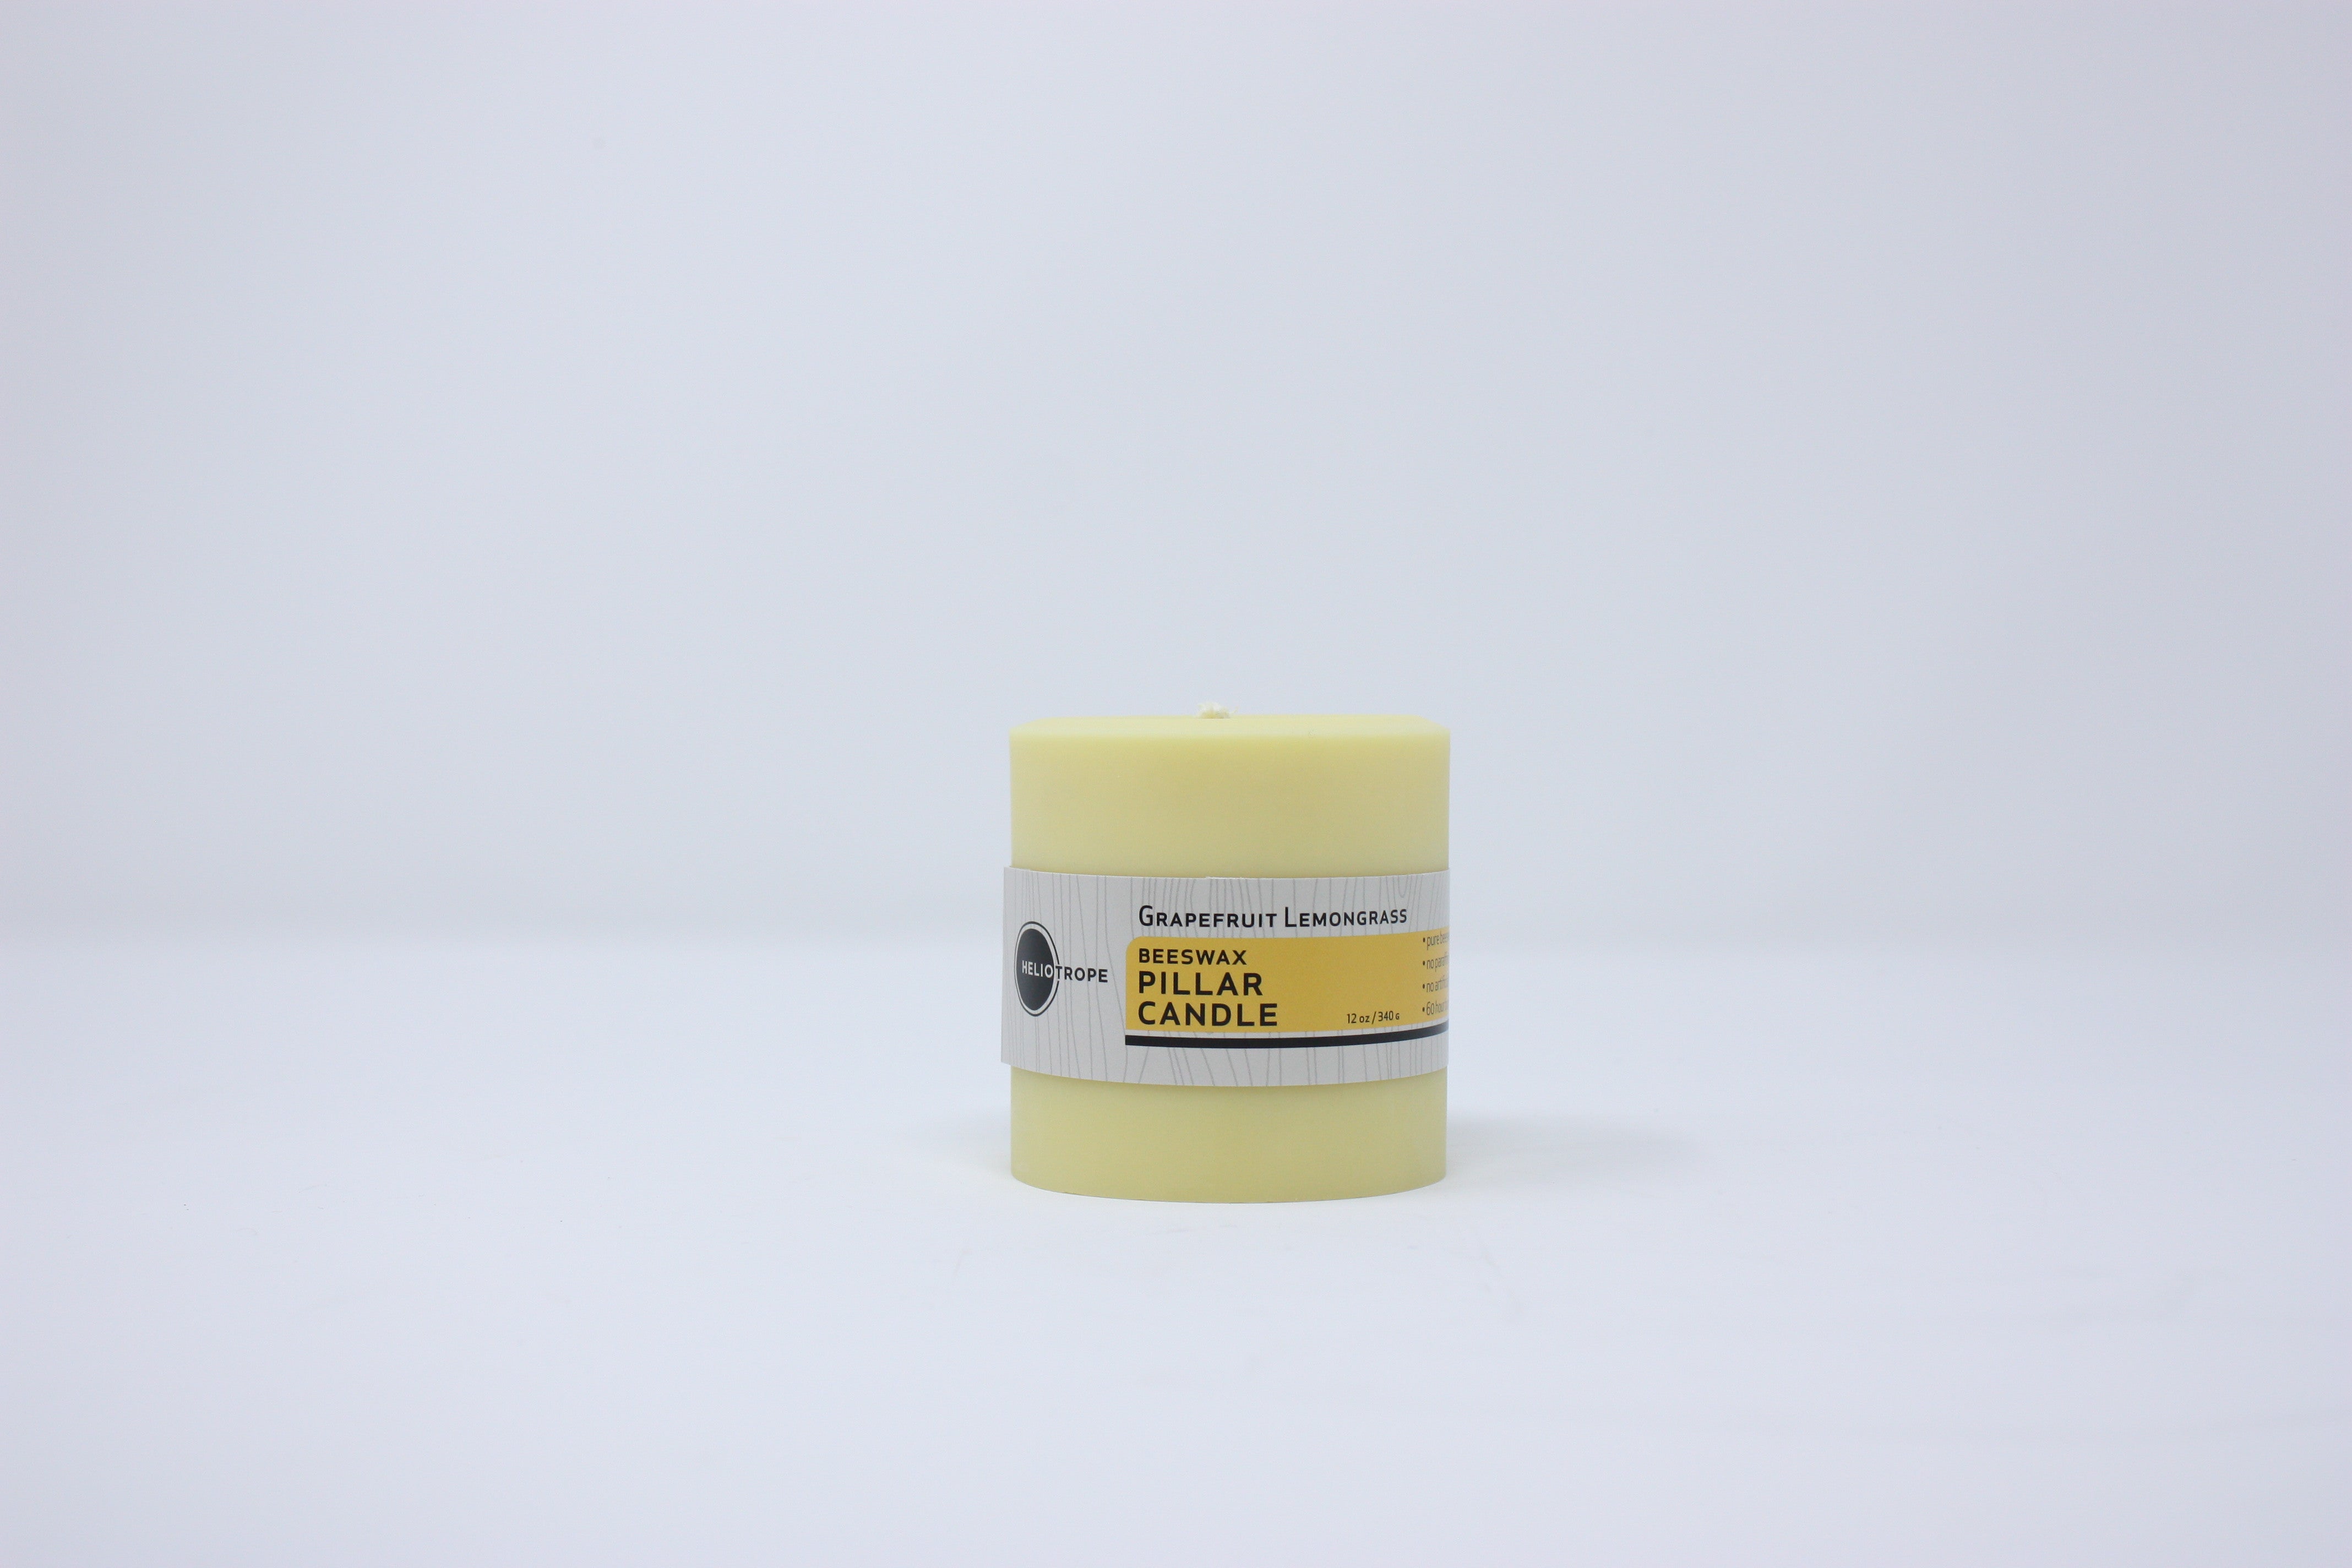  Beeswax & Soy Candles by Heliotrope San Francisco Heliotrope San Francisco Perfumarie